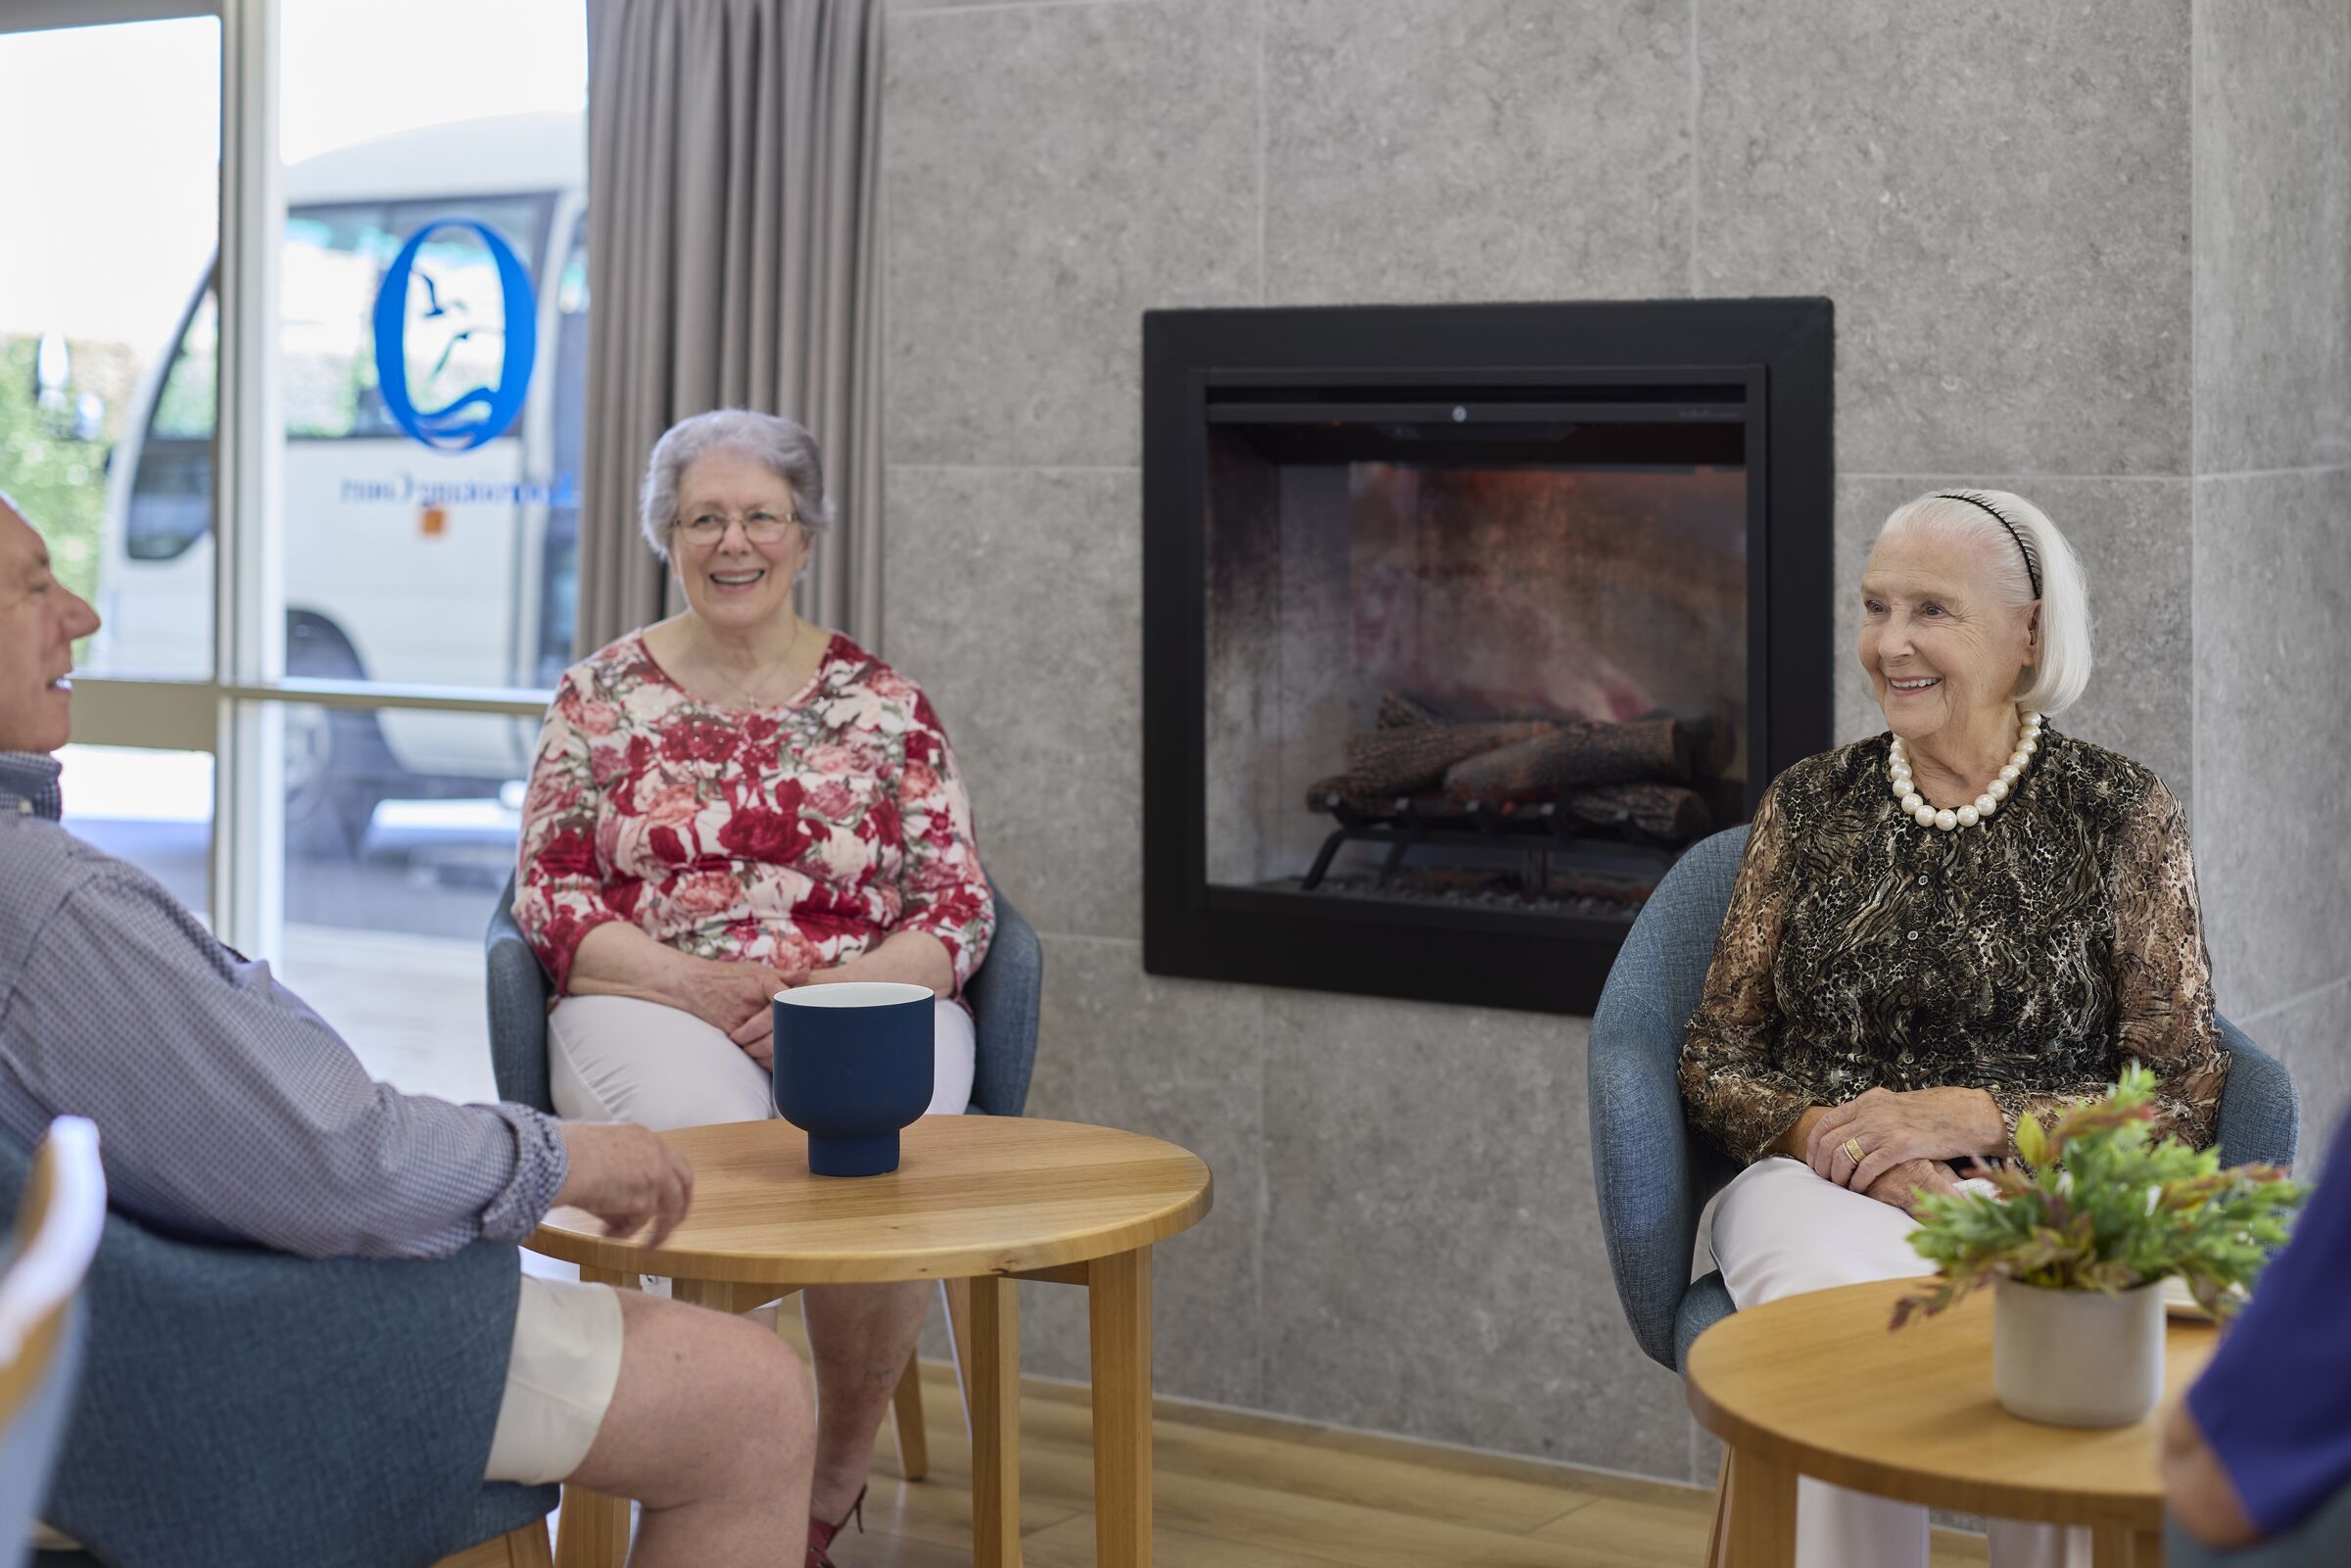 Koorootang Court Residents in community centre near the fireplace